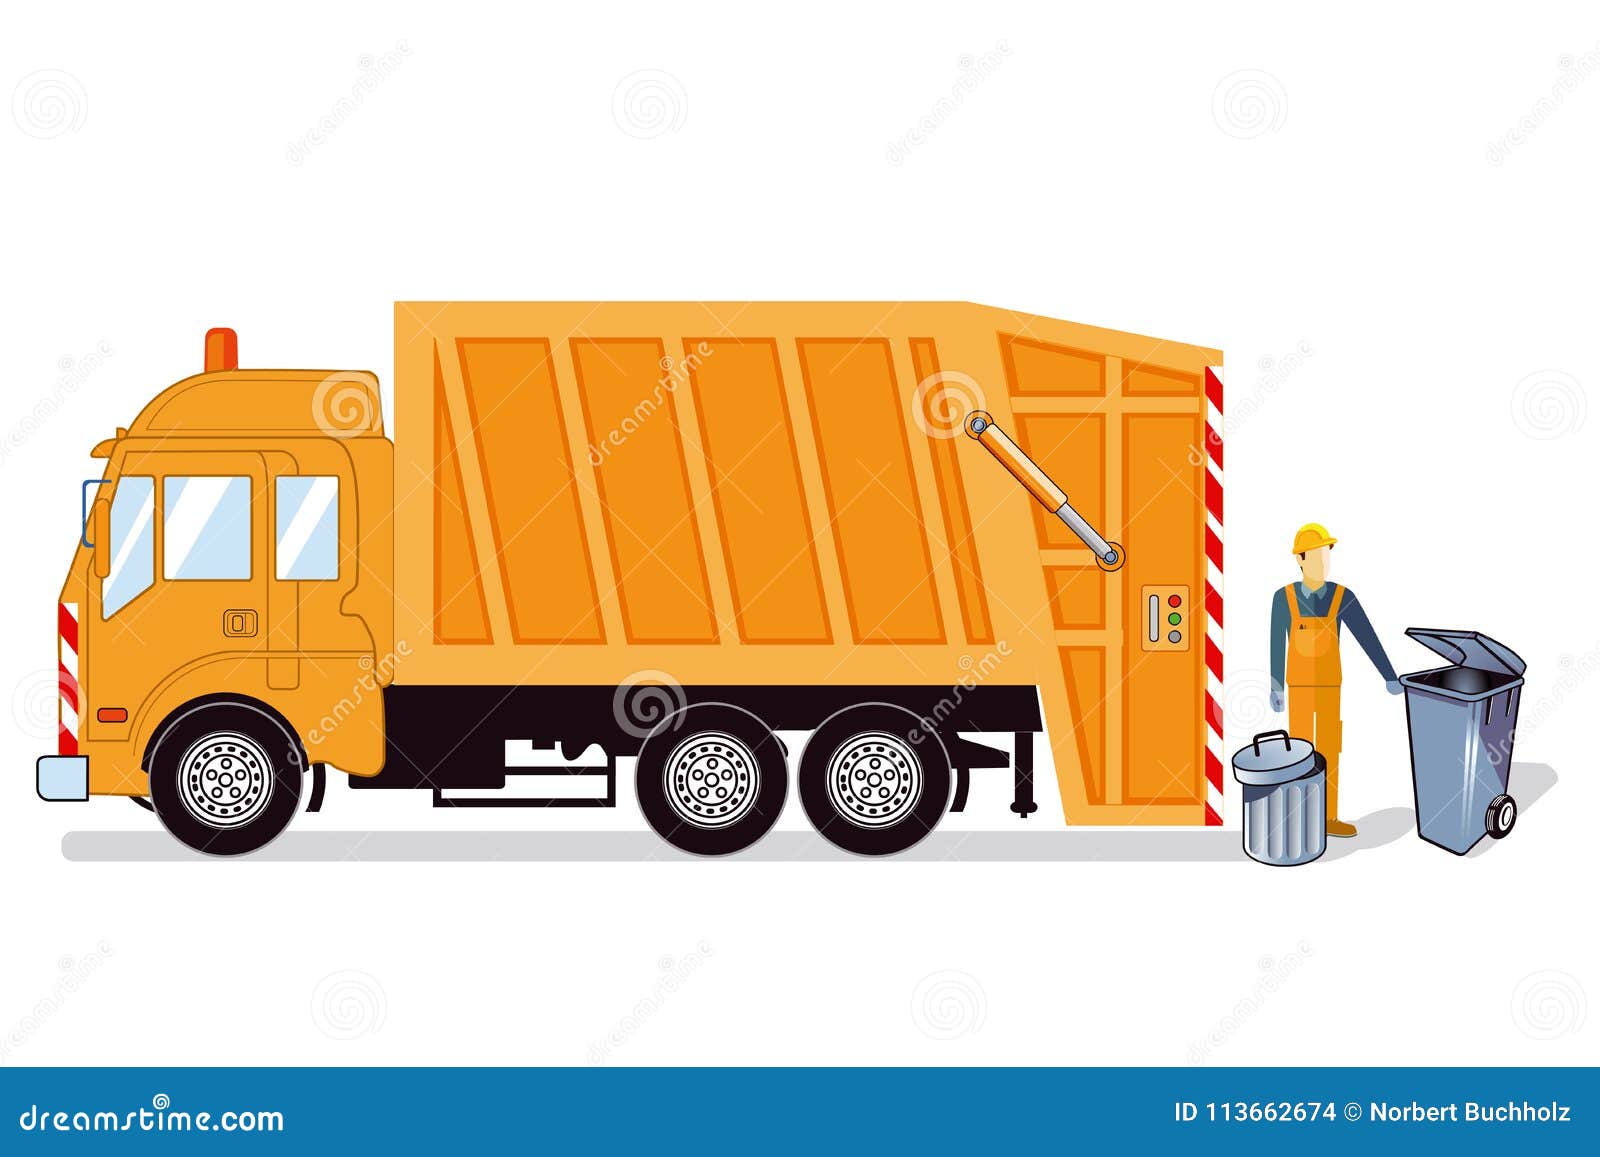 Garbage truck illustration stock vector. Illustration of cans - 113662674